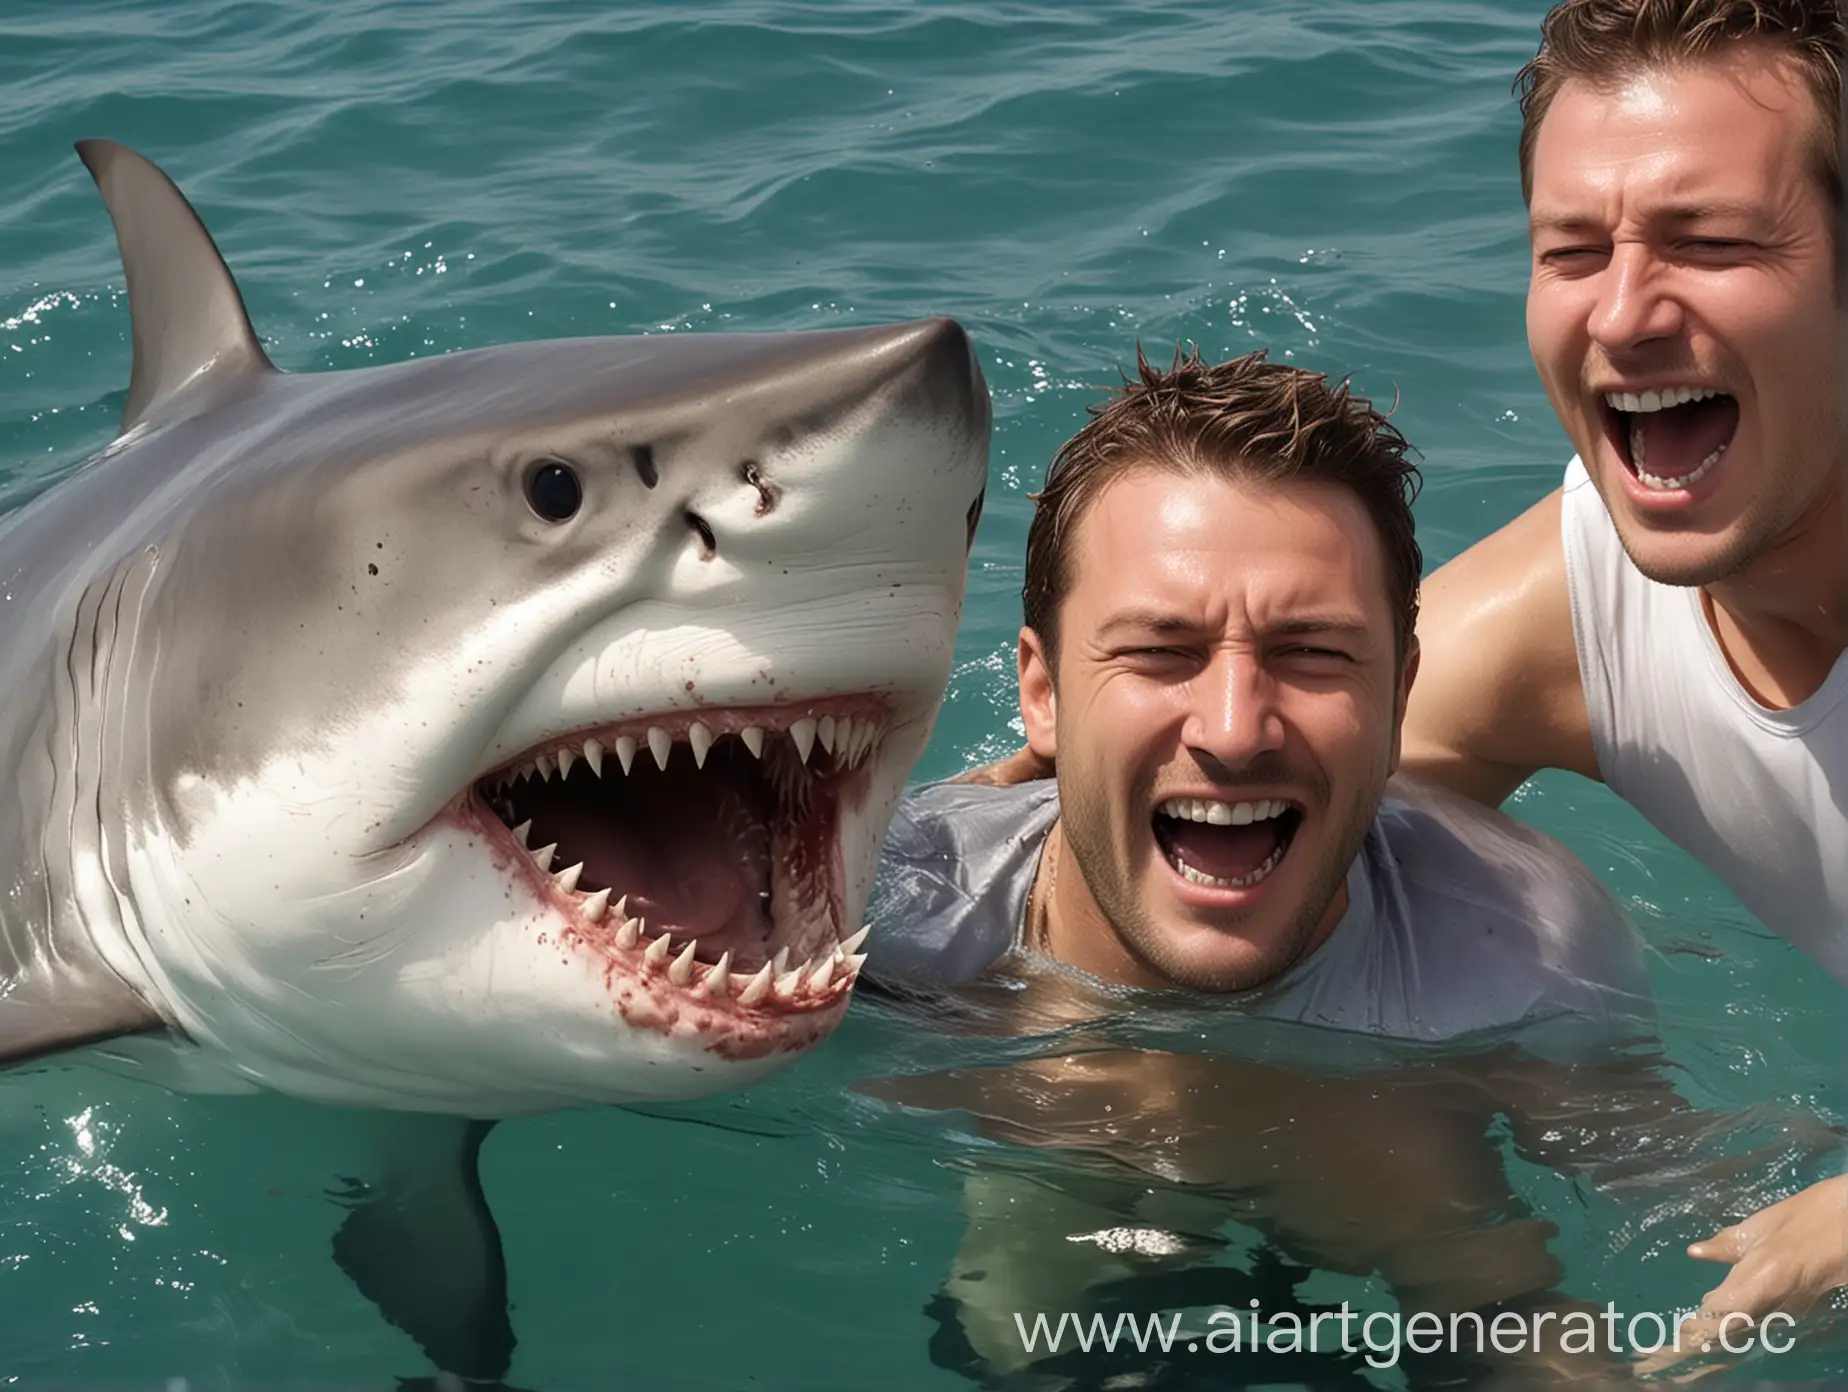 The shark attacks the man and makes the shark laugh on his face